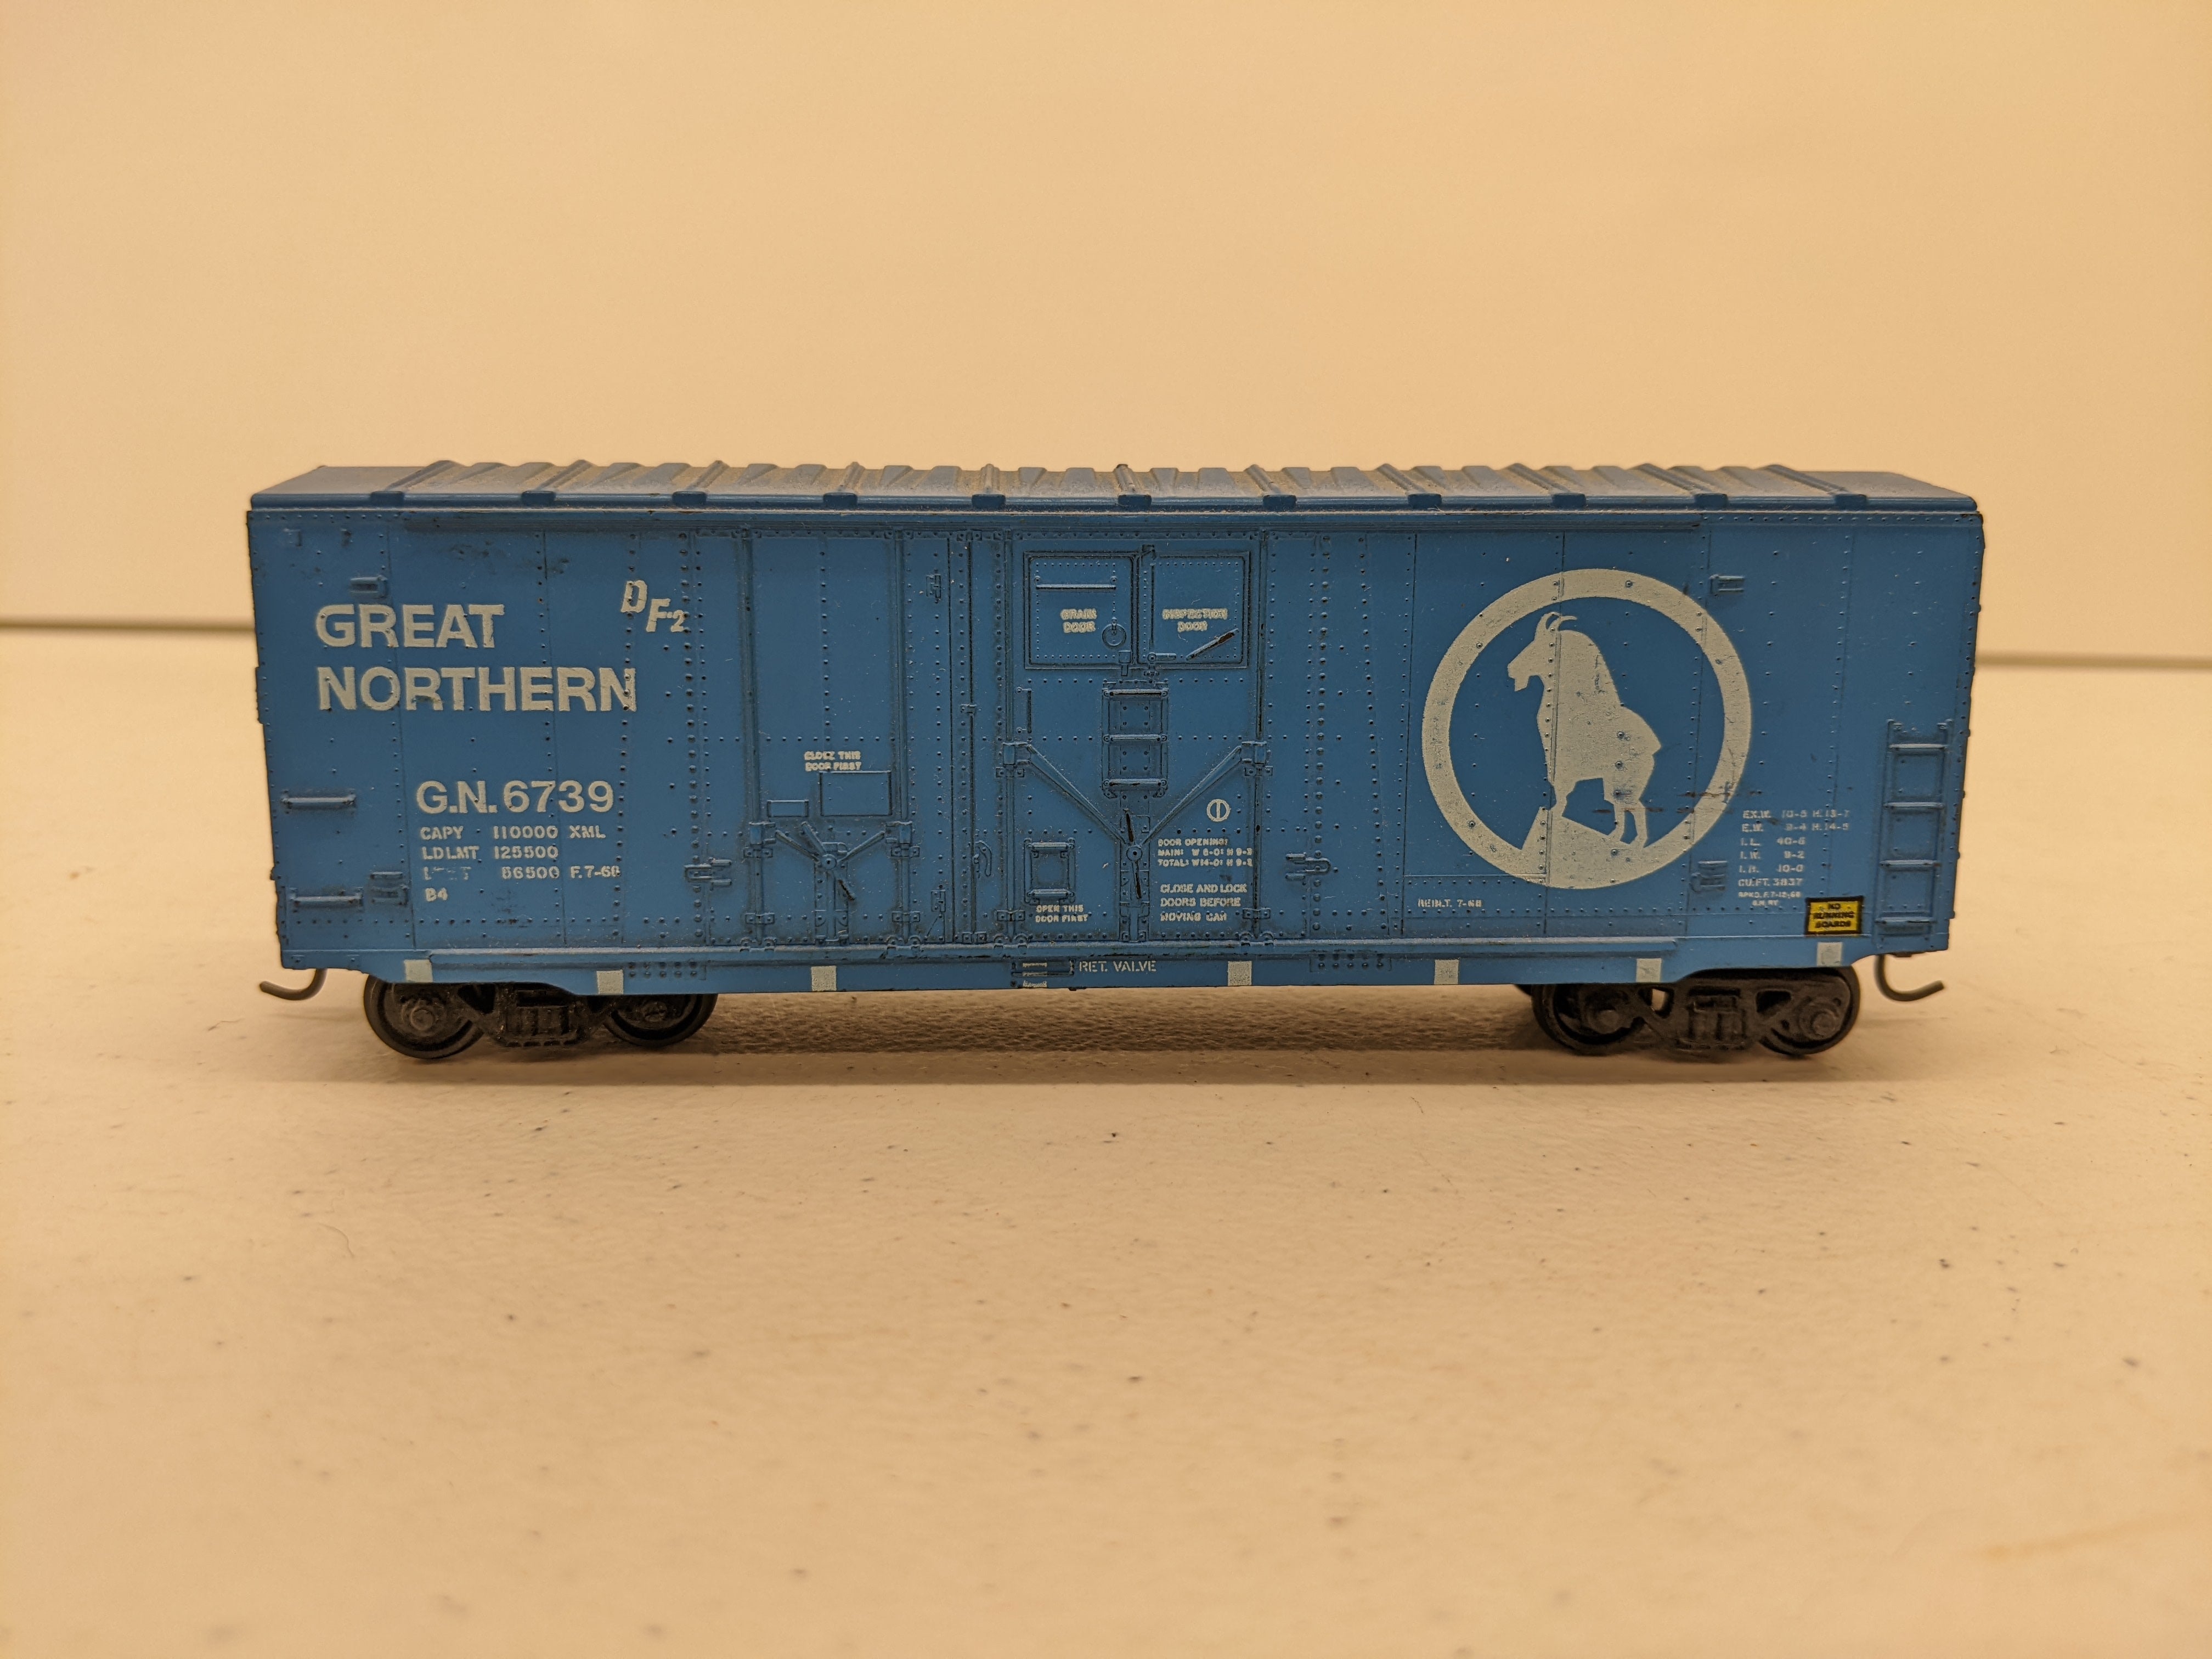 USED Athearn HO Scale, 40' Box Car, Great Northern GN #6739